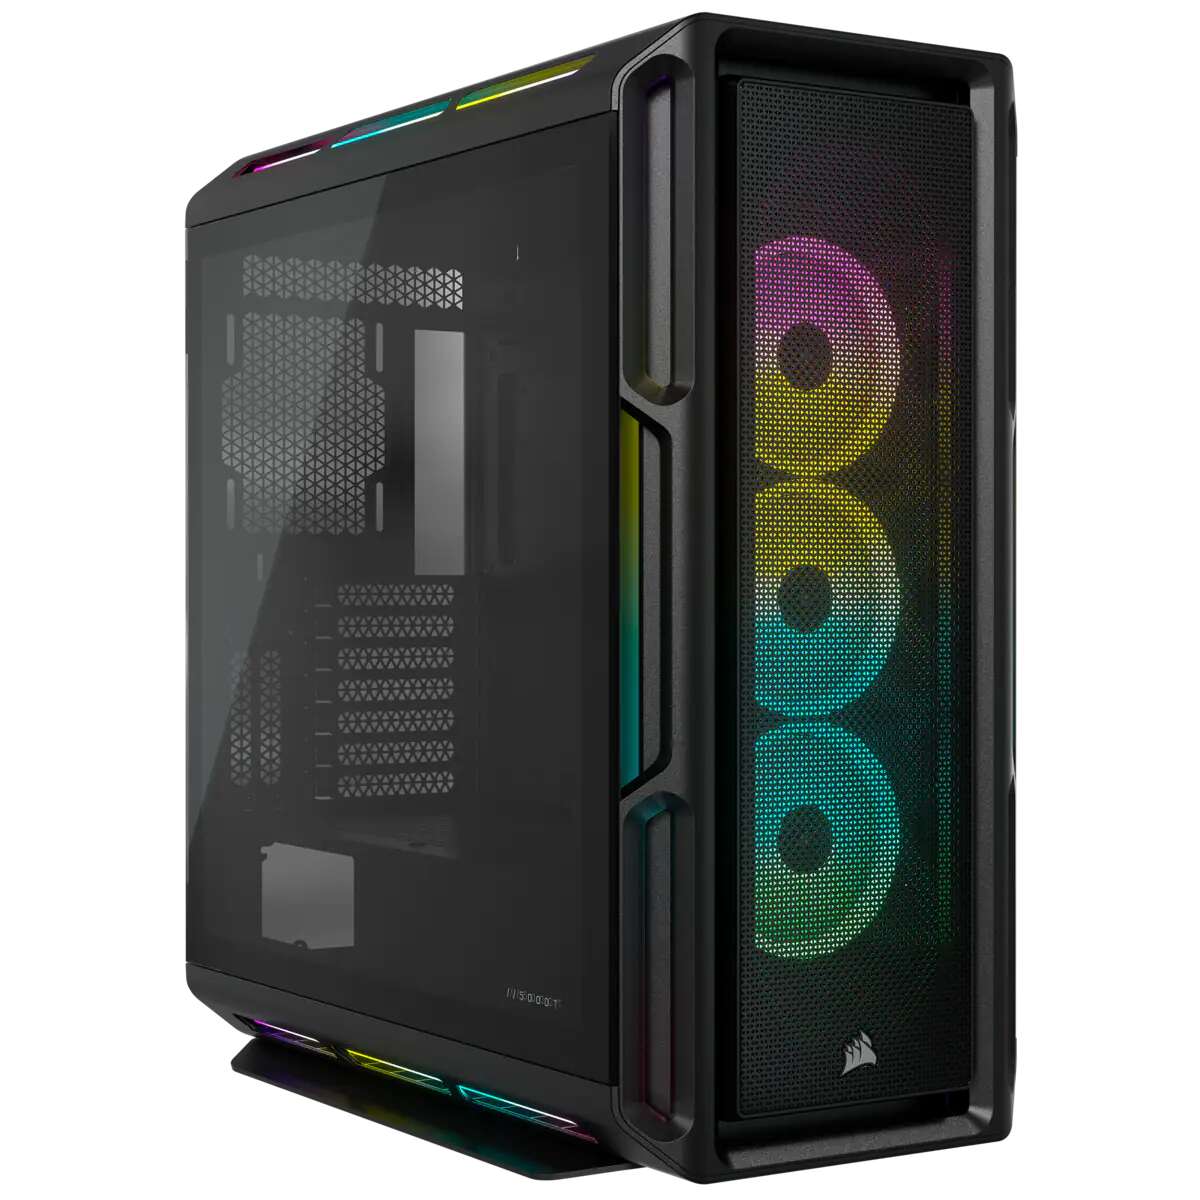 Corsair icue 5000t rgb tempered glass mid-tower smart case black